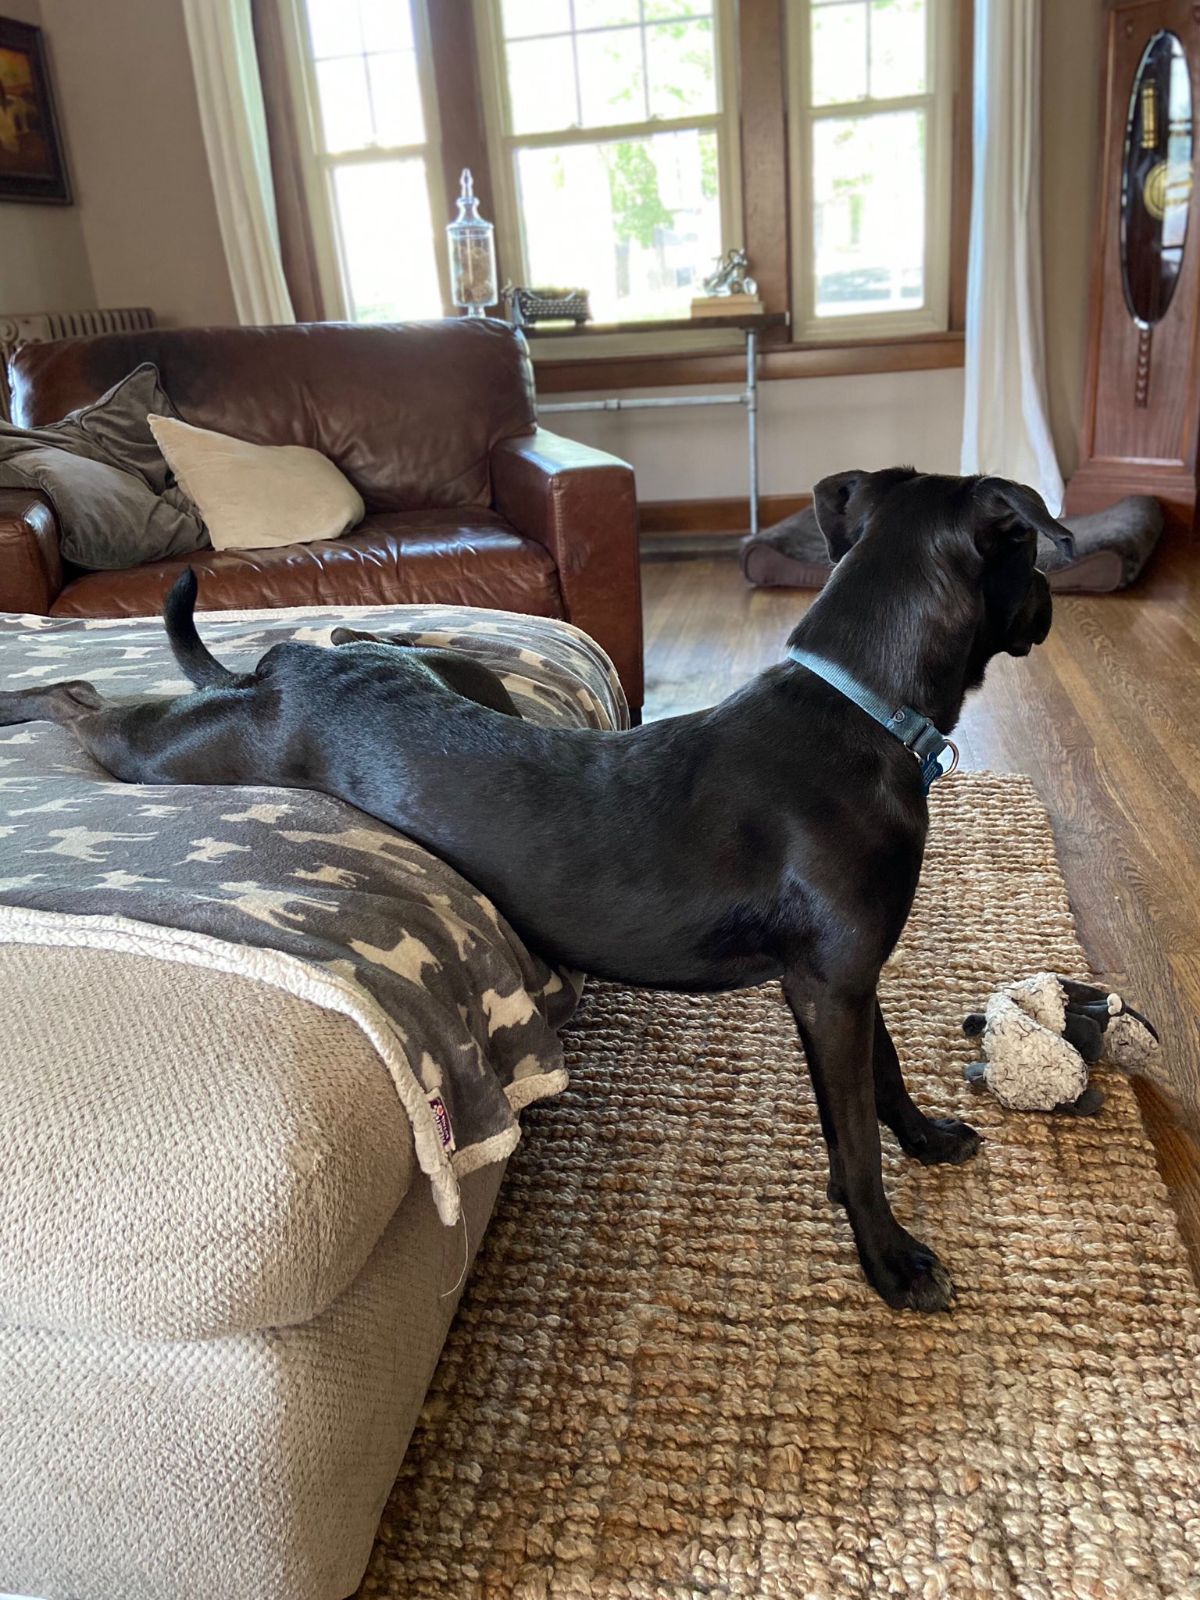 black dog with back half on a bed and the front legs on the floor